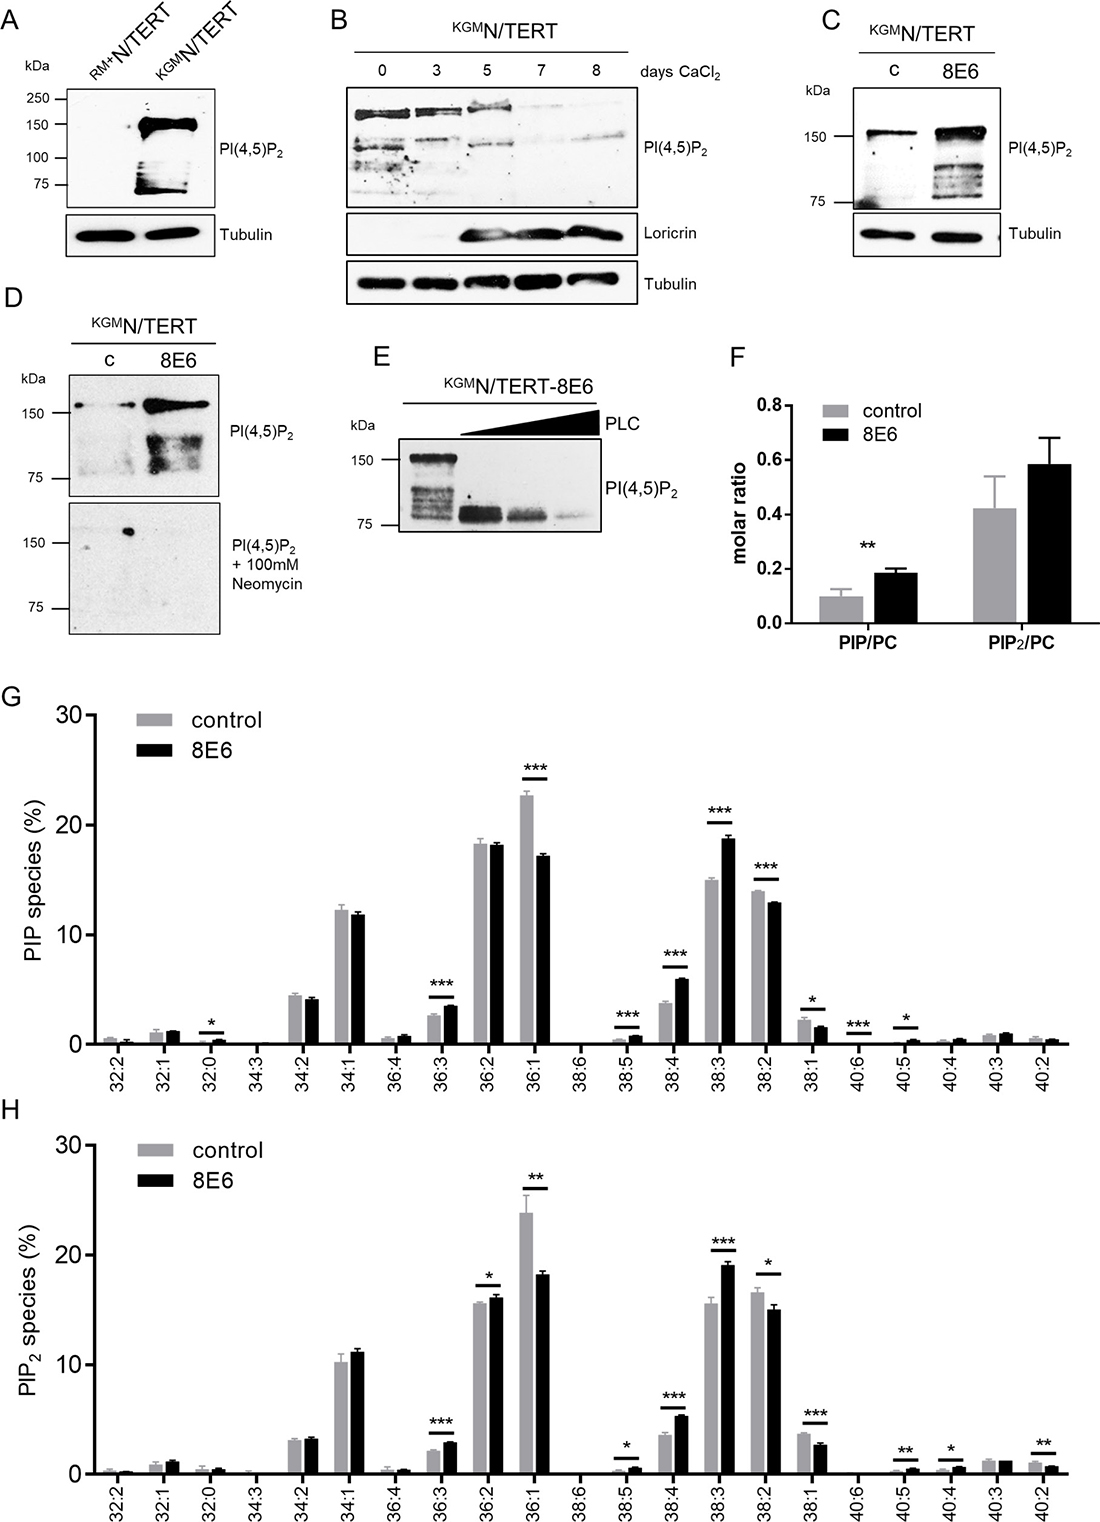 Expression of HPV8-E6 leads to high PI(4,5)P2 levels in N/TERTs cultured in low calcium media.